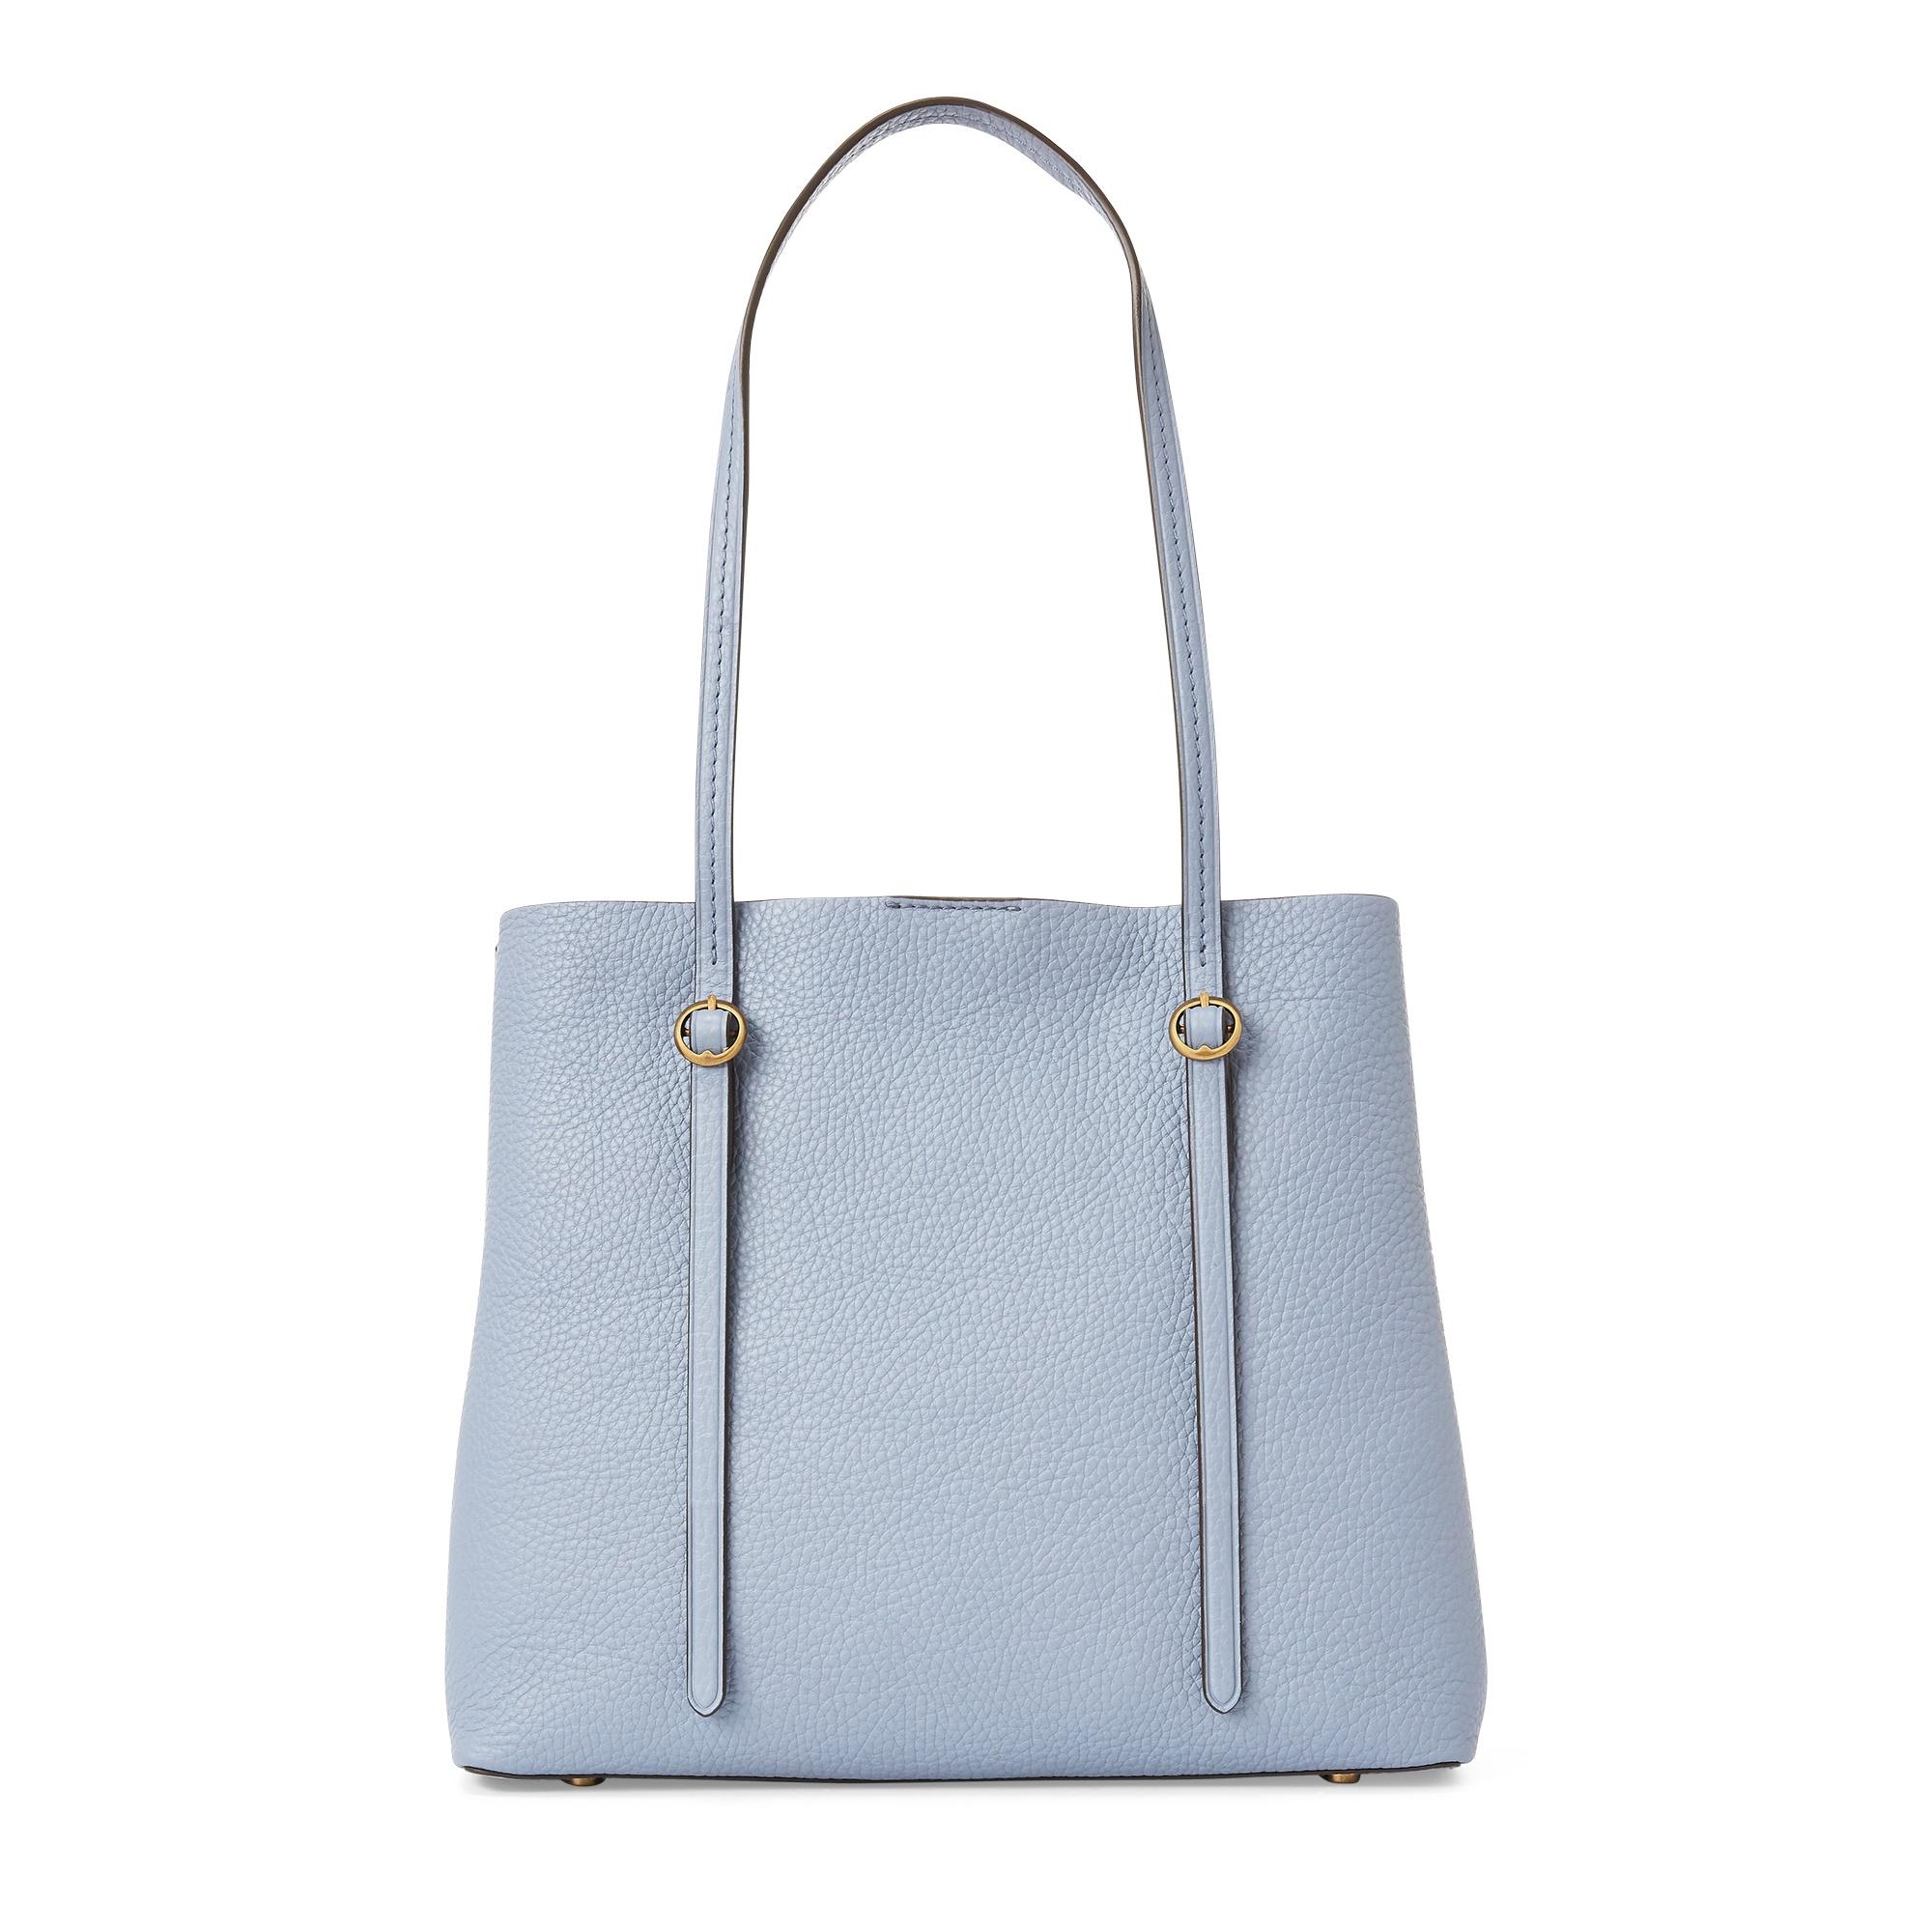 Polo Ralph Lauren Pebbled Leather Lennox Tote in Chambray (Blue) - Lyst